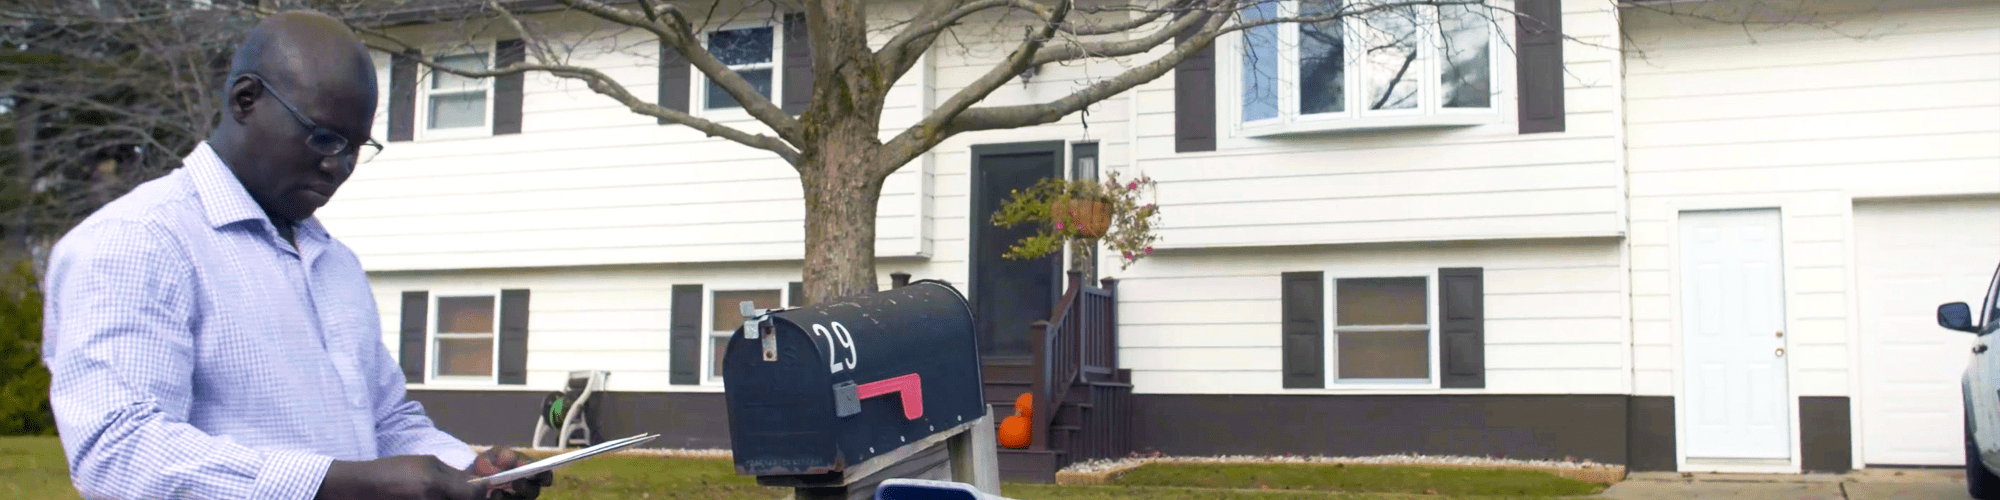 A man in front of his home, checking his mail at the mailbox